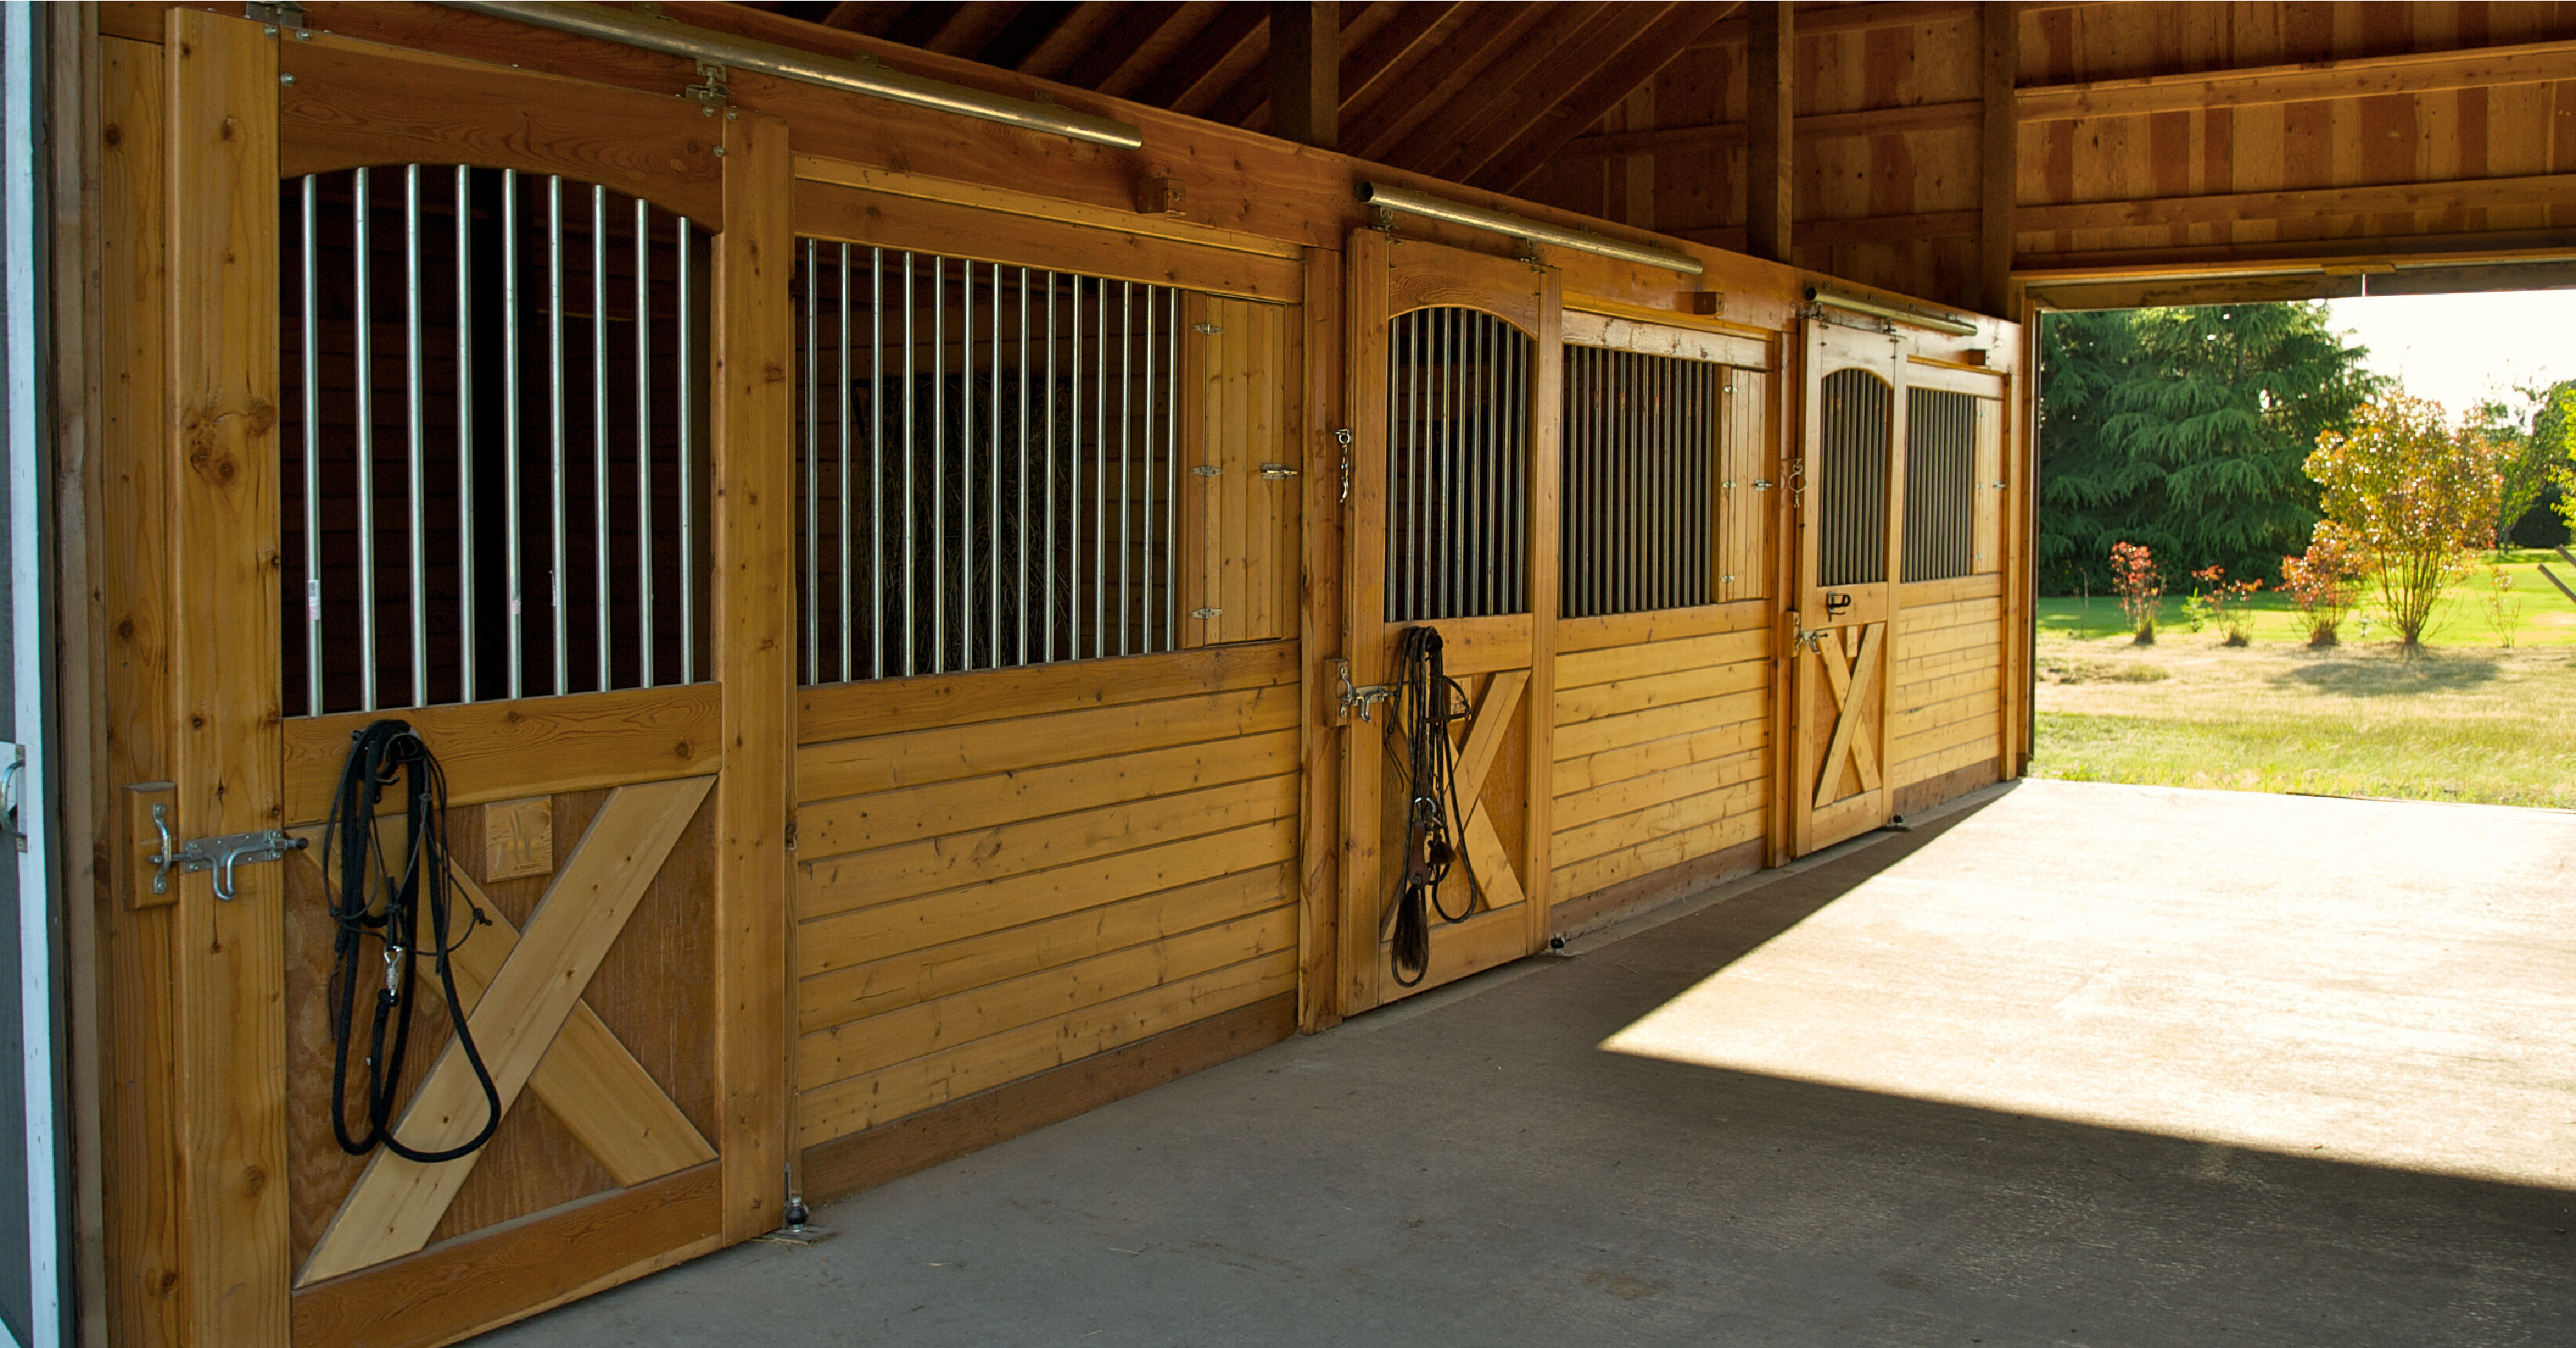 The Costs of Building an Equestrian Facility